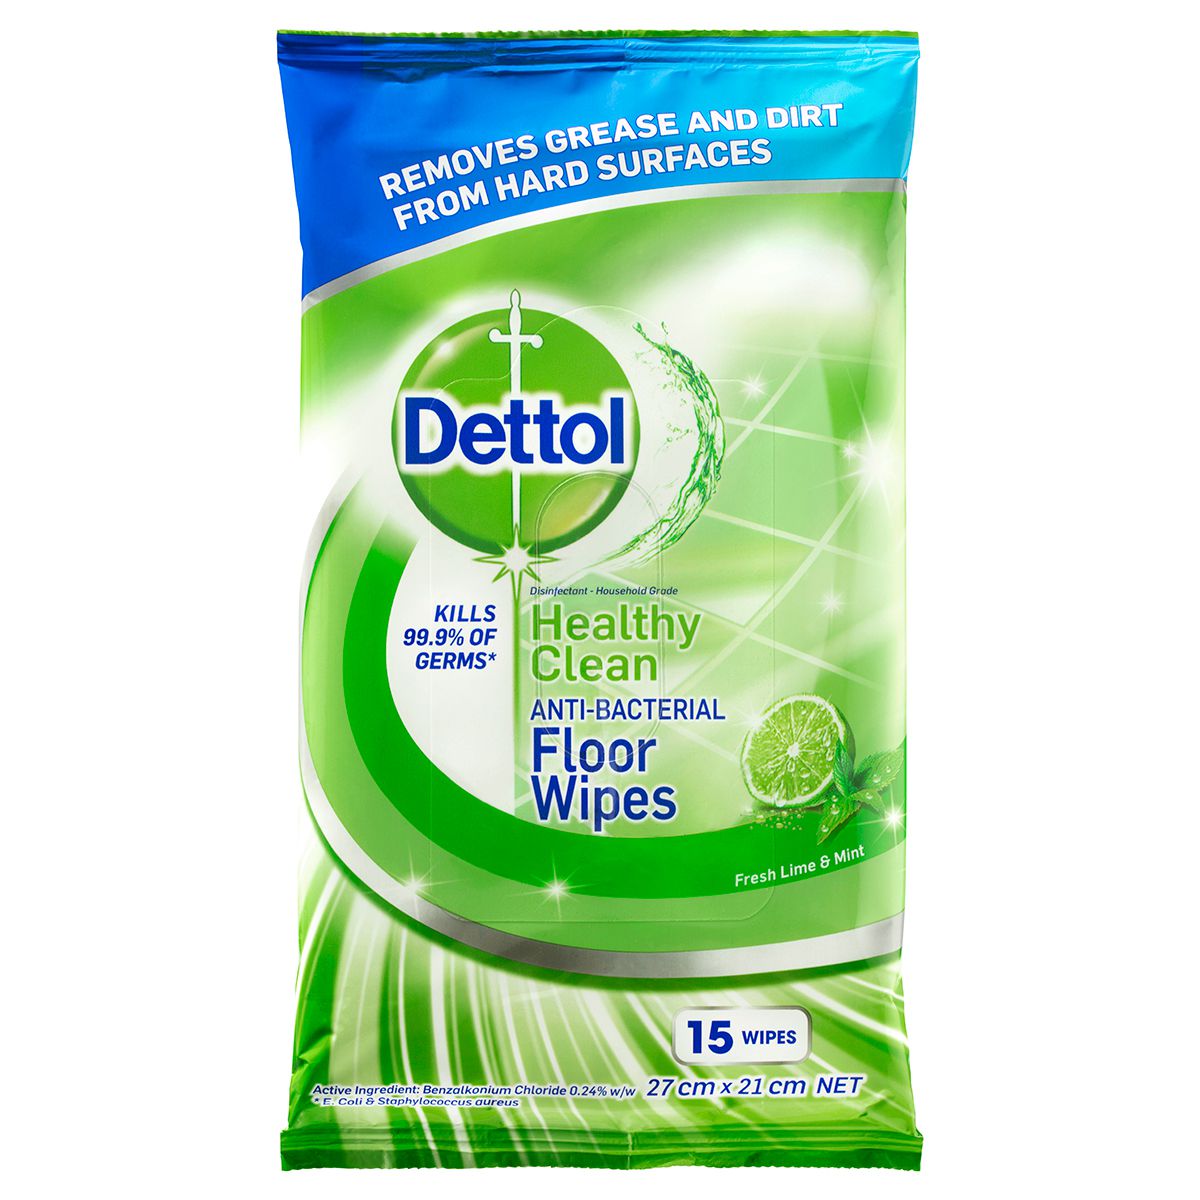 15 Extra Large Wipes Dettol Multi Action Floor Wipes Anti